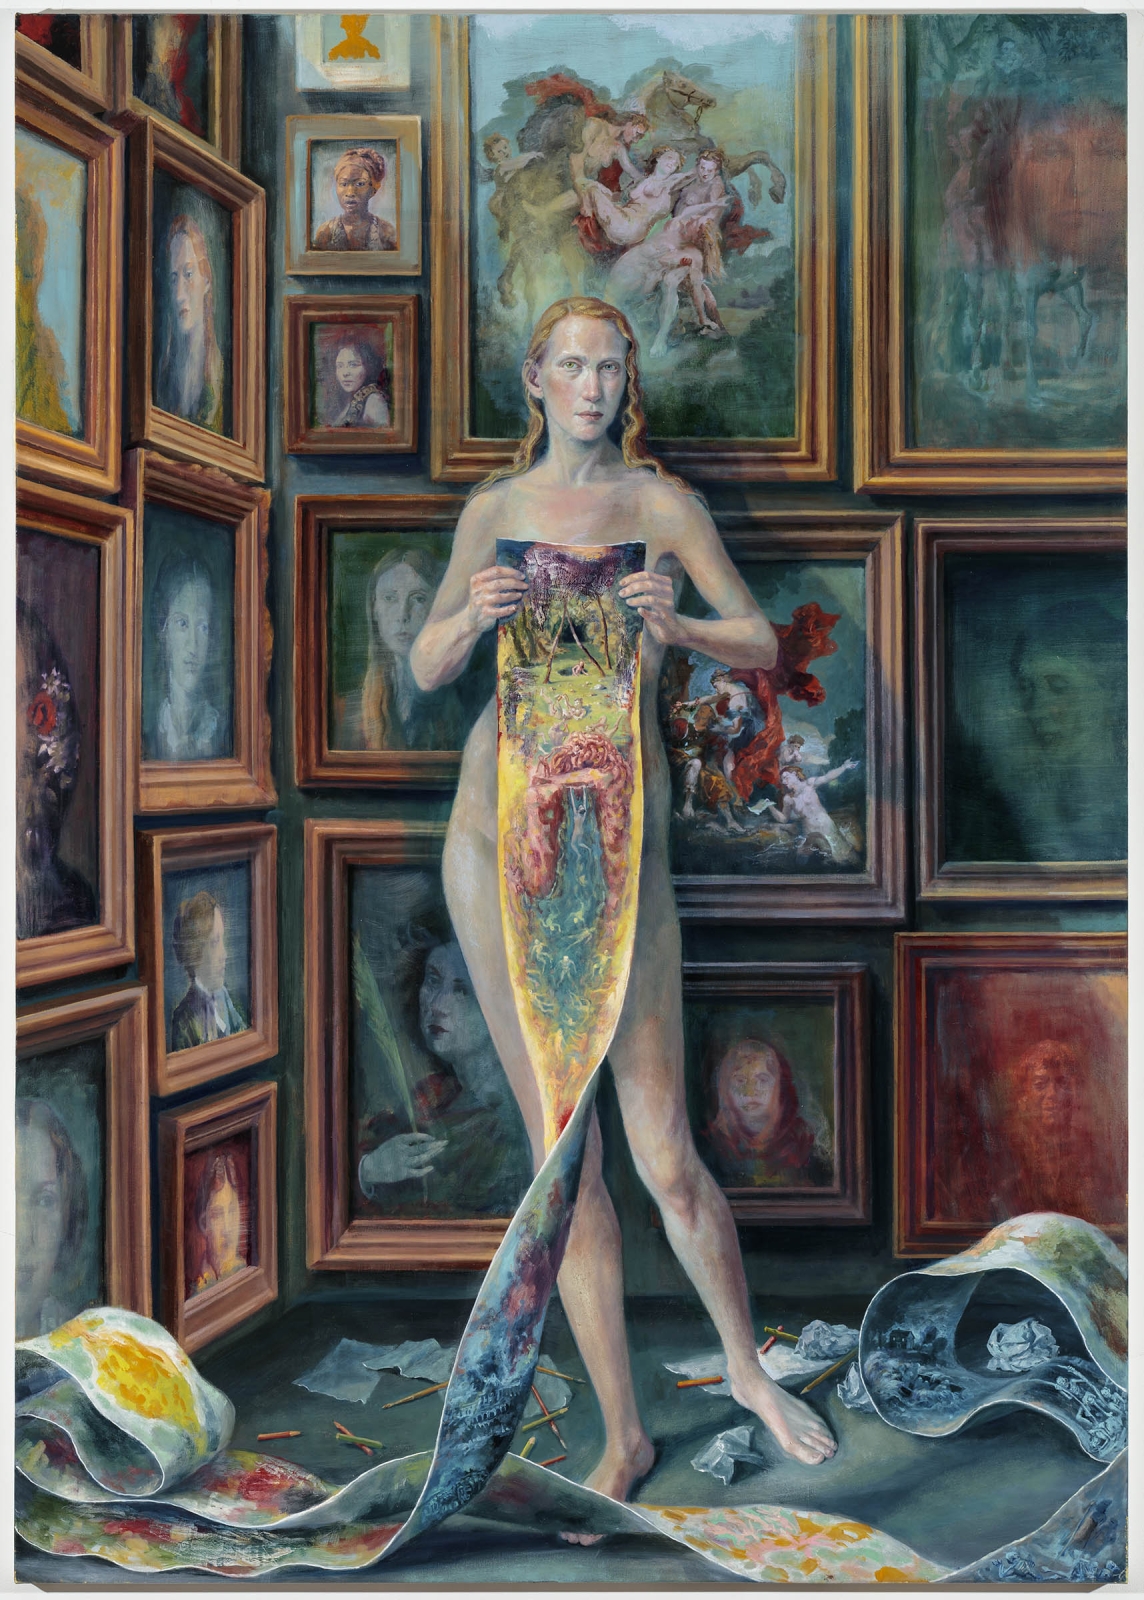 Julie Heffernan
Self-Portait with the Daughters, 2018
Oil on canvas
79 x 56 inches